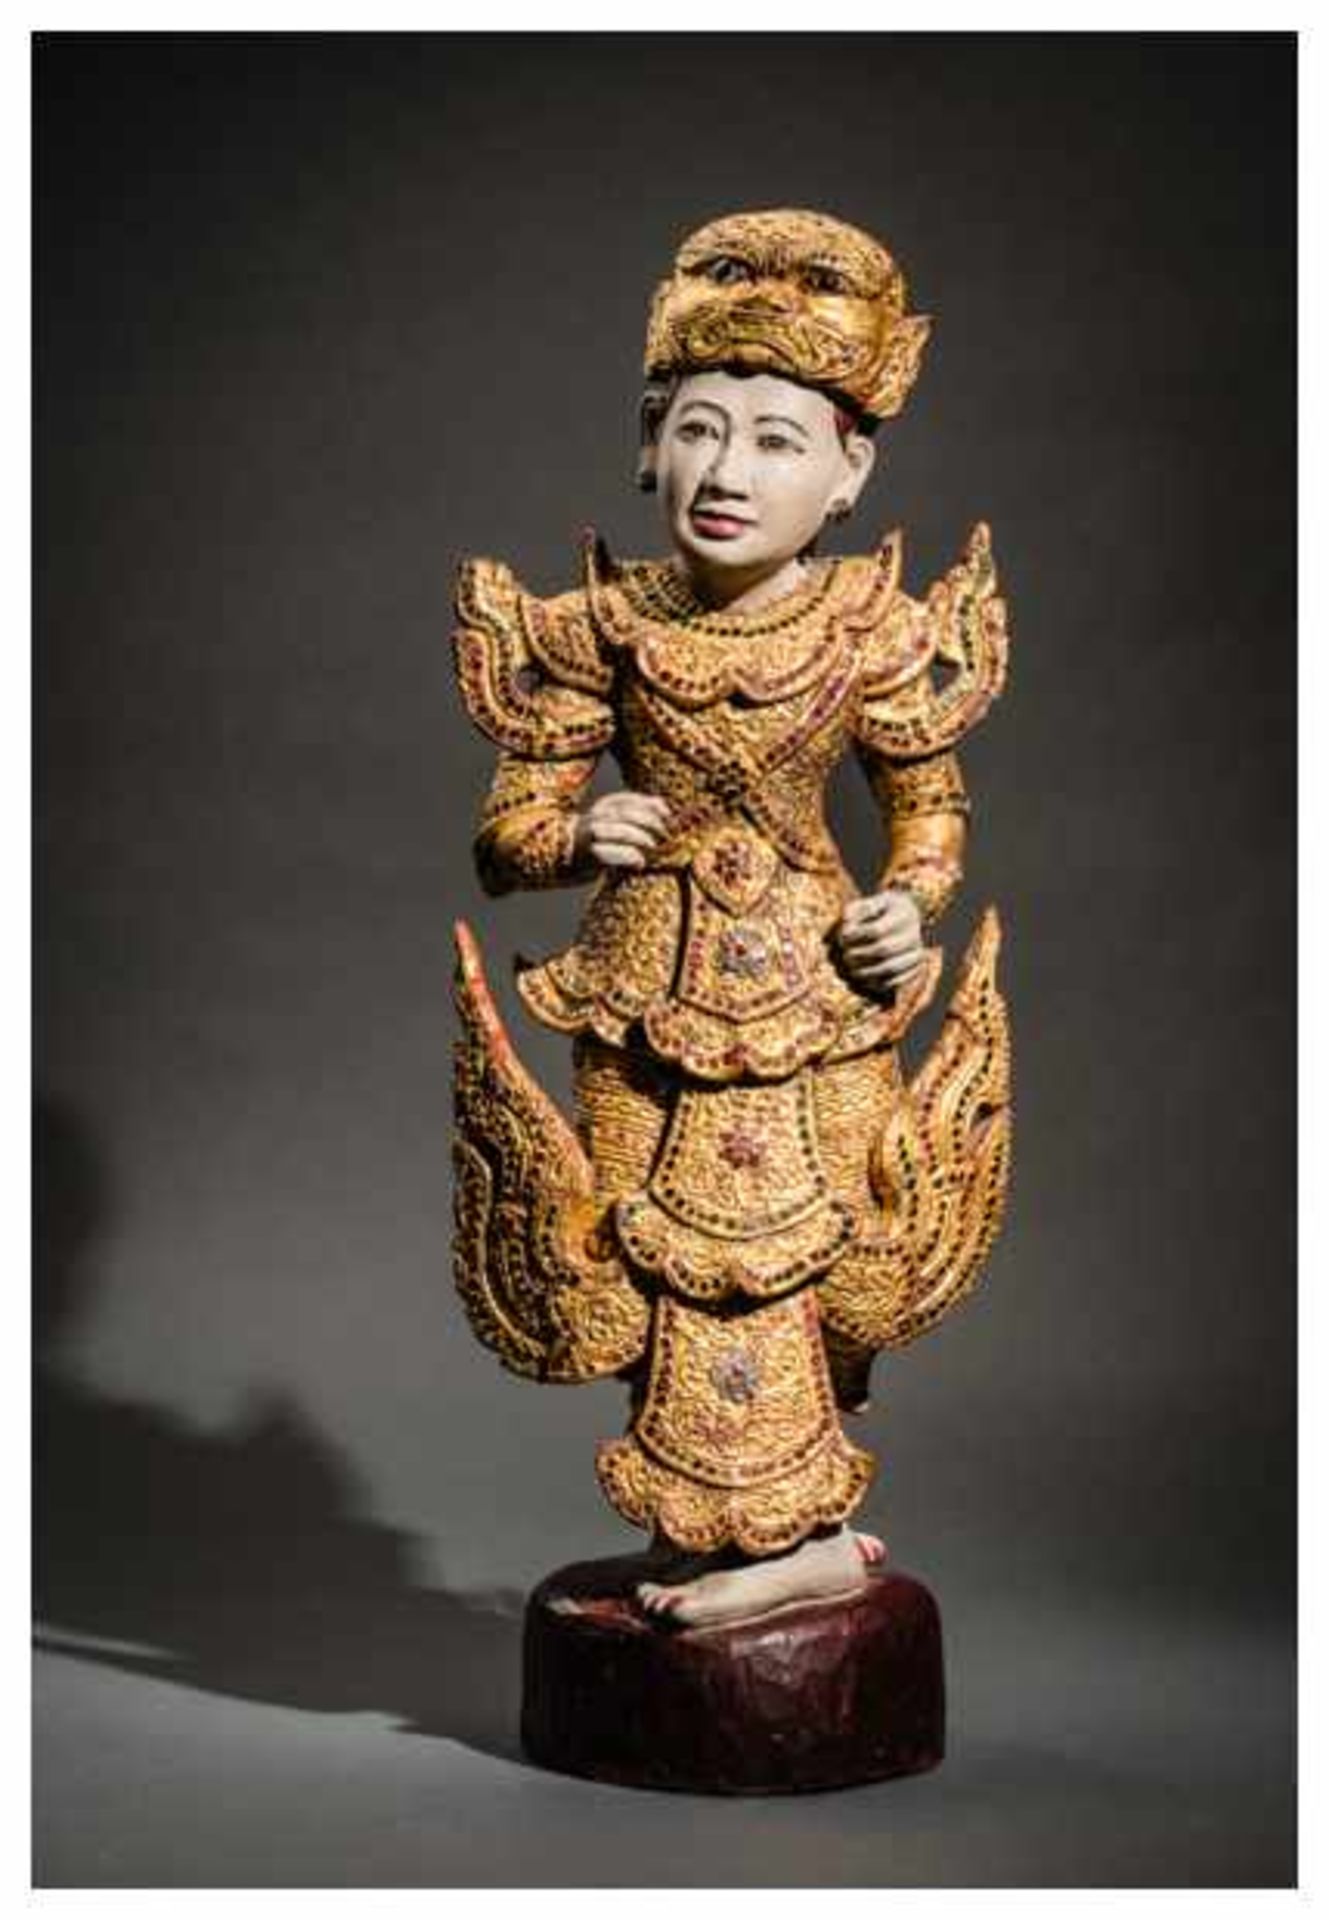 THEATER FIGURE WITH DEMON MASK Wood, lacquer paint, gilding, inlays. Burma, late Konbaung to 20th